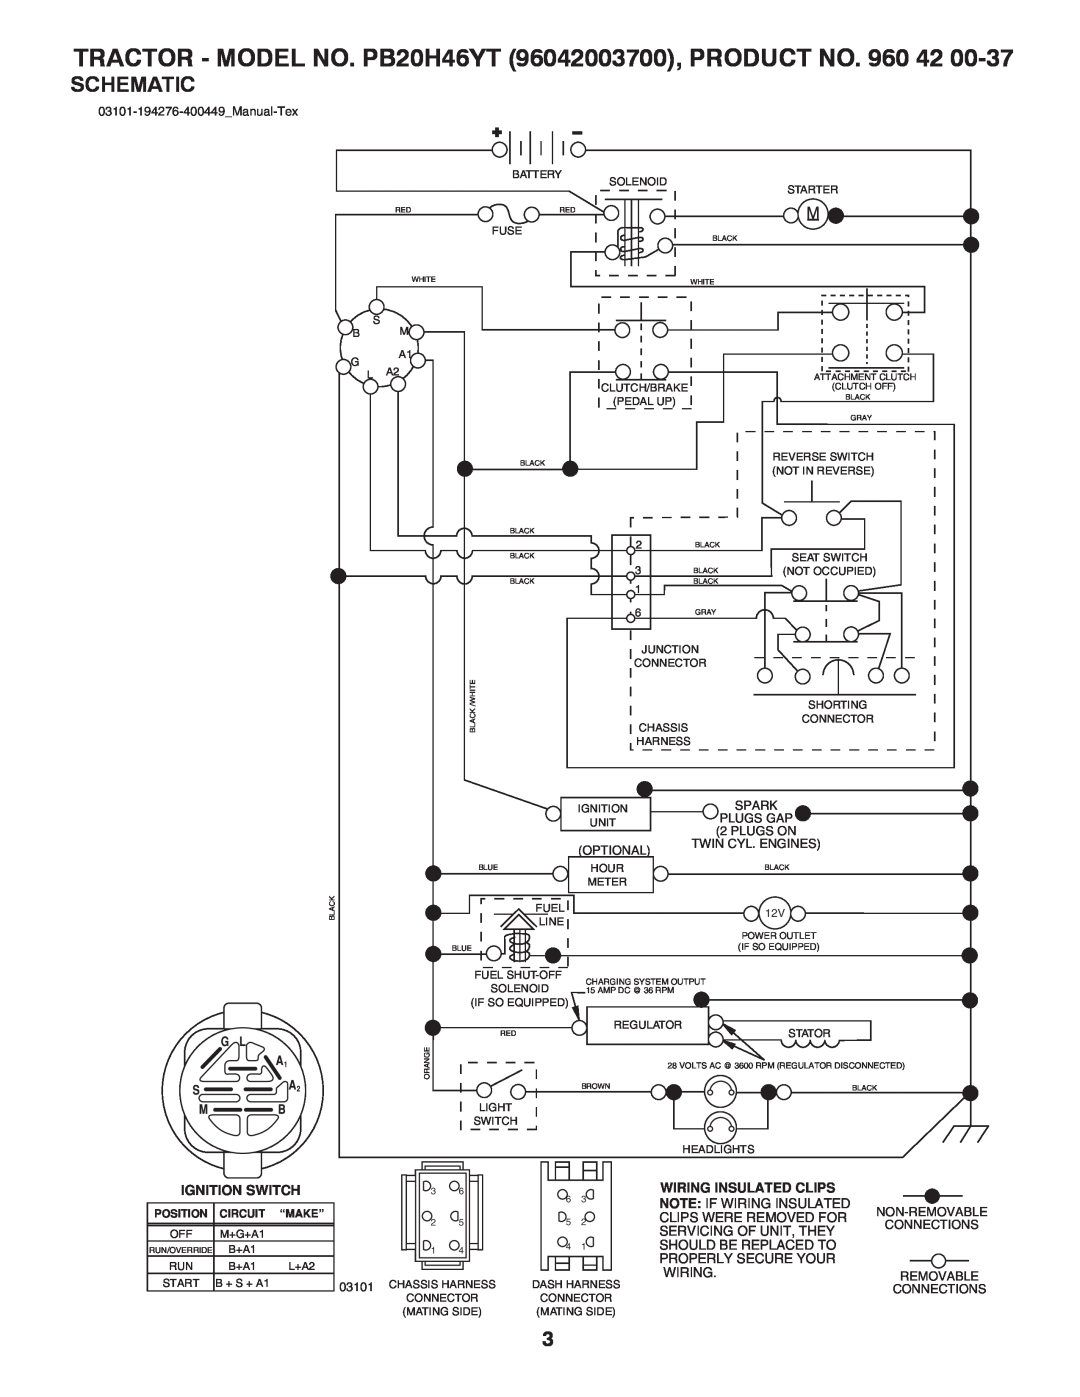 Poulan manual Schematic, TRACTOR - MODEL NO. PB20H46YT 96042003700, PRODUCT NO, Optional 